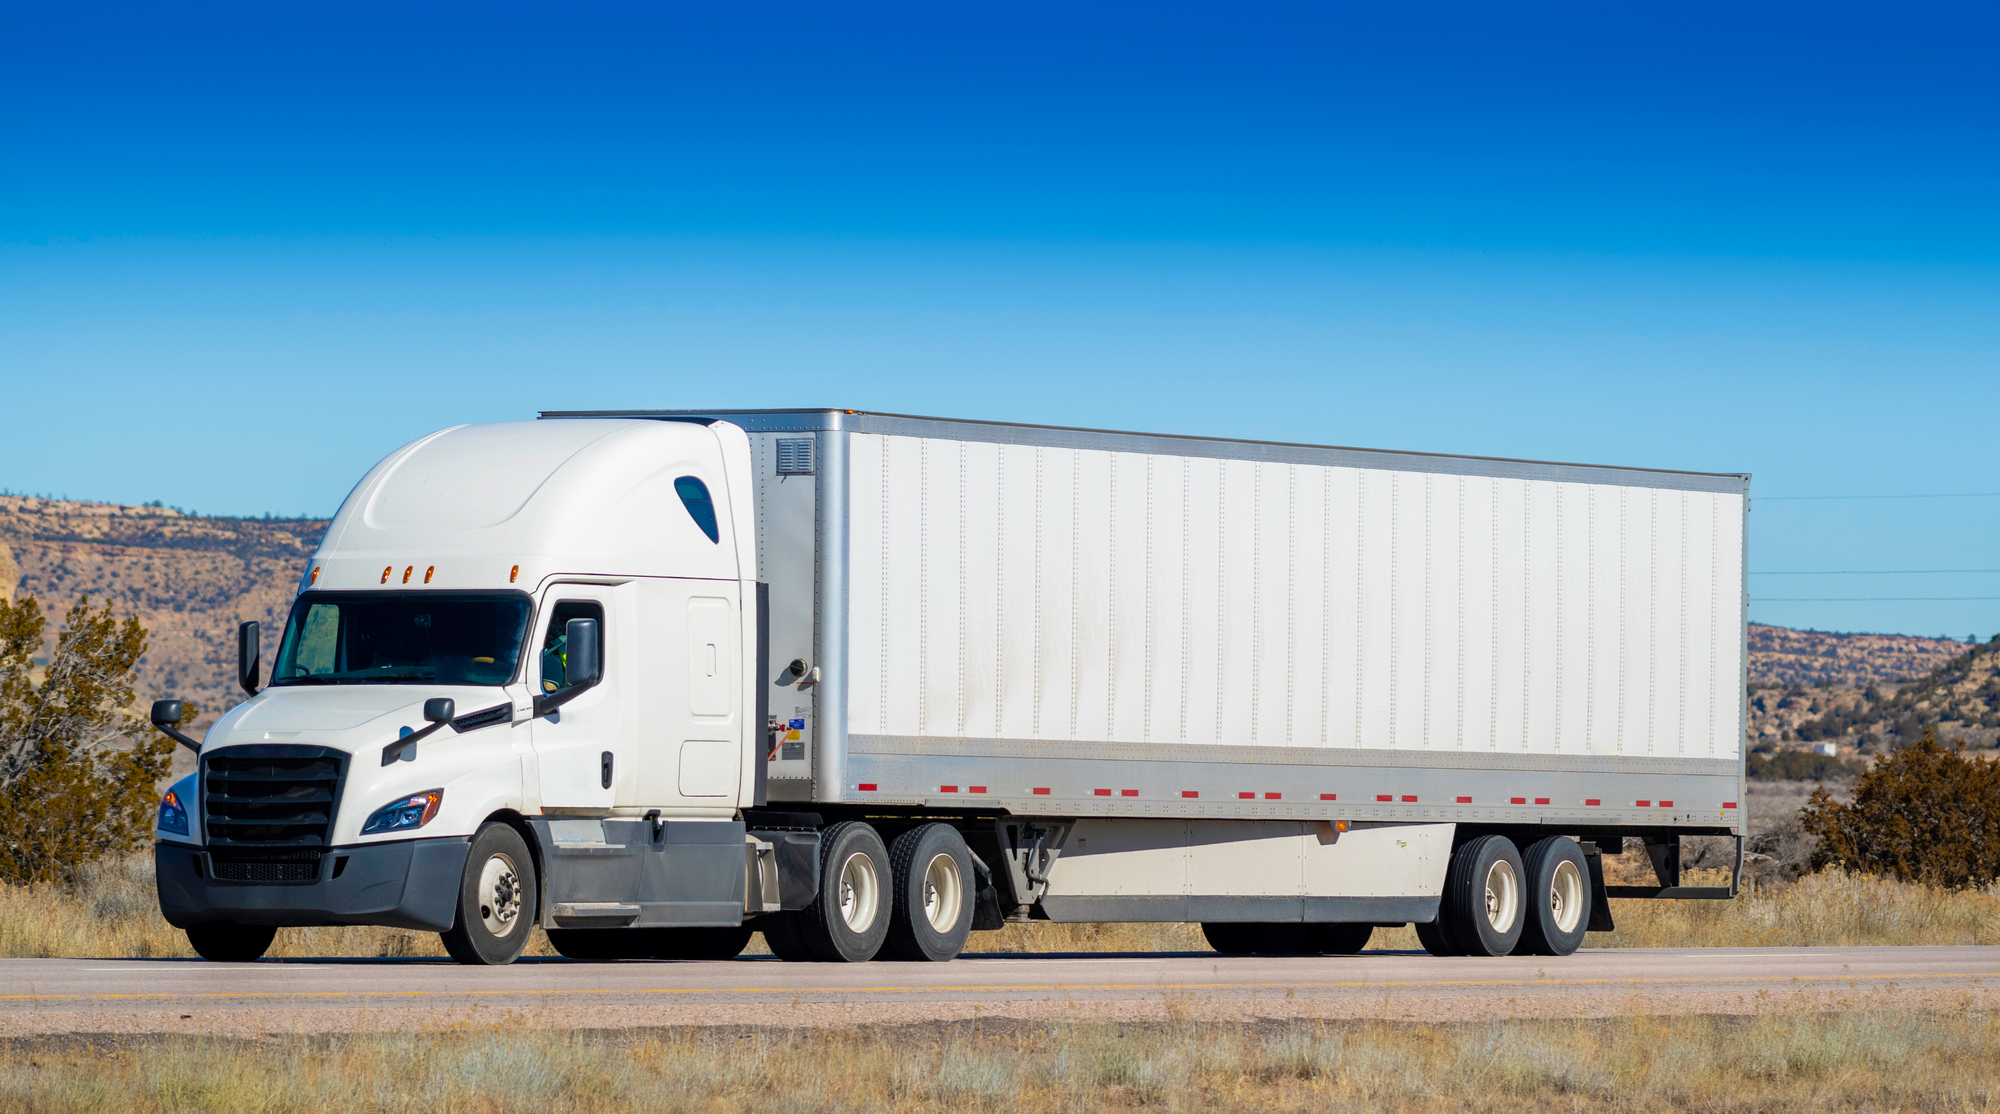 Truck Accident Avoidance Tips for Small Vehicles - Eighteen wheel big rig tractor with trailer on highway. Trucking industry